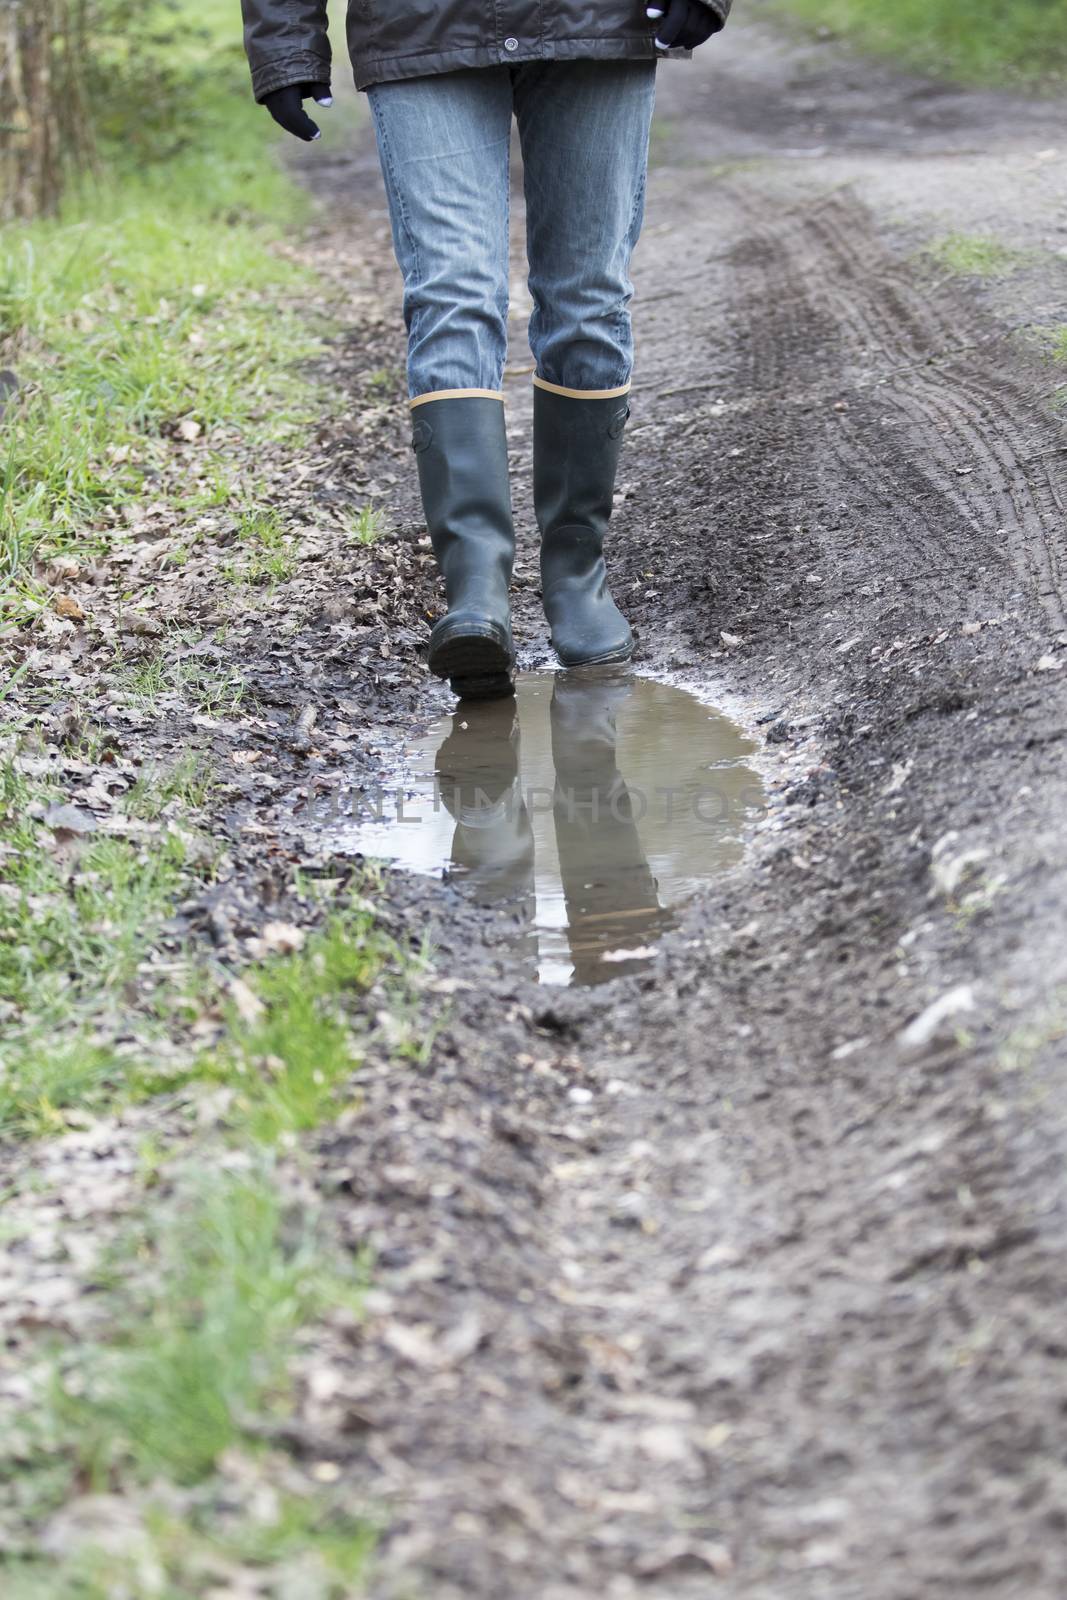 Man woman with rubber boots walking on rural path